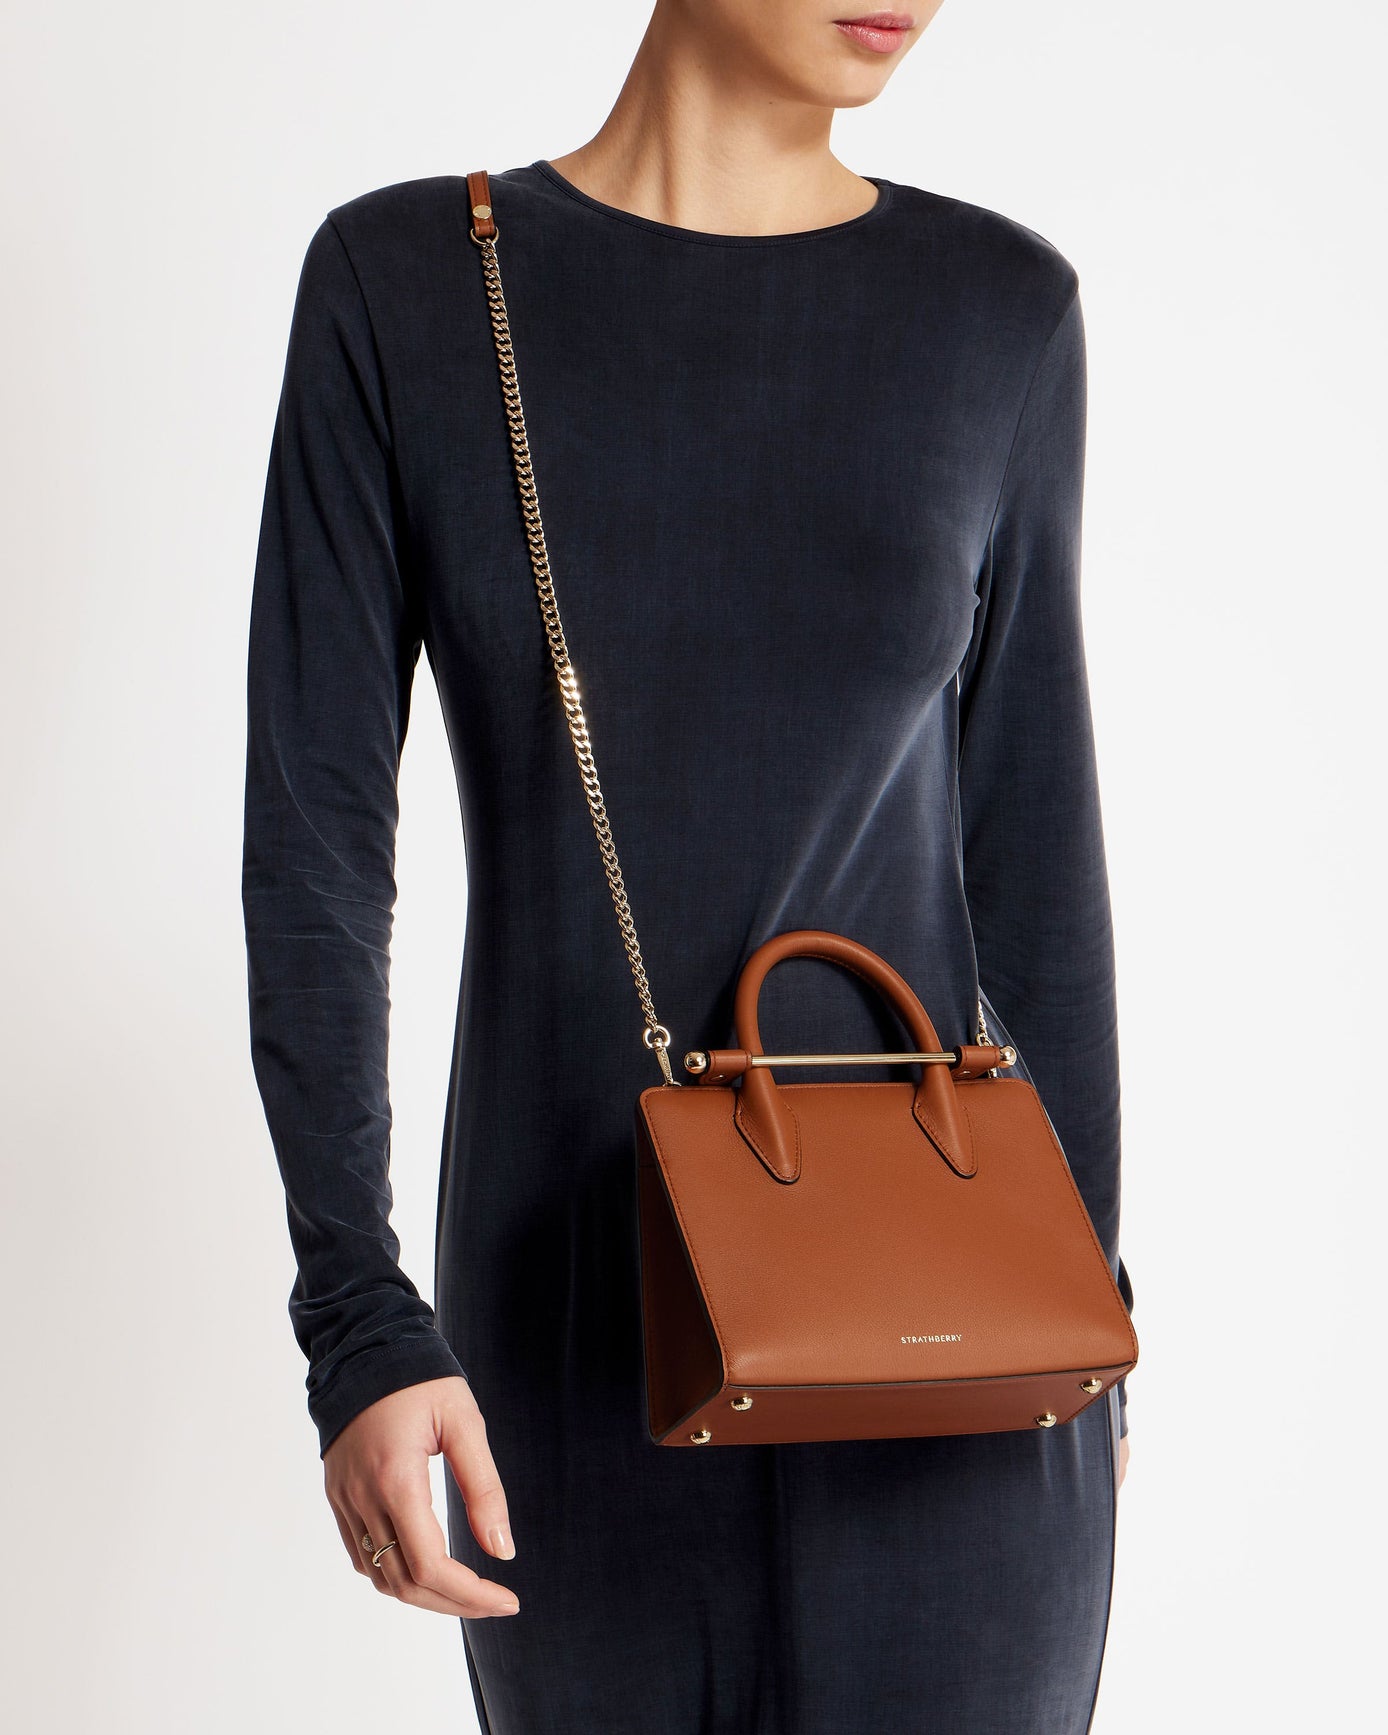 The Strathberry Mini Tote - Tan | Strathberry